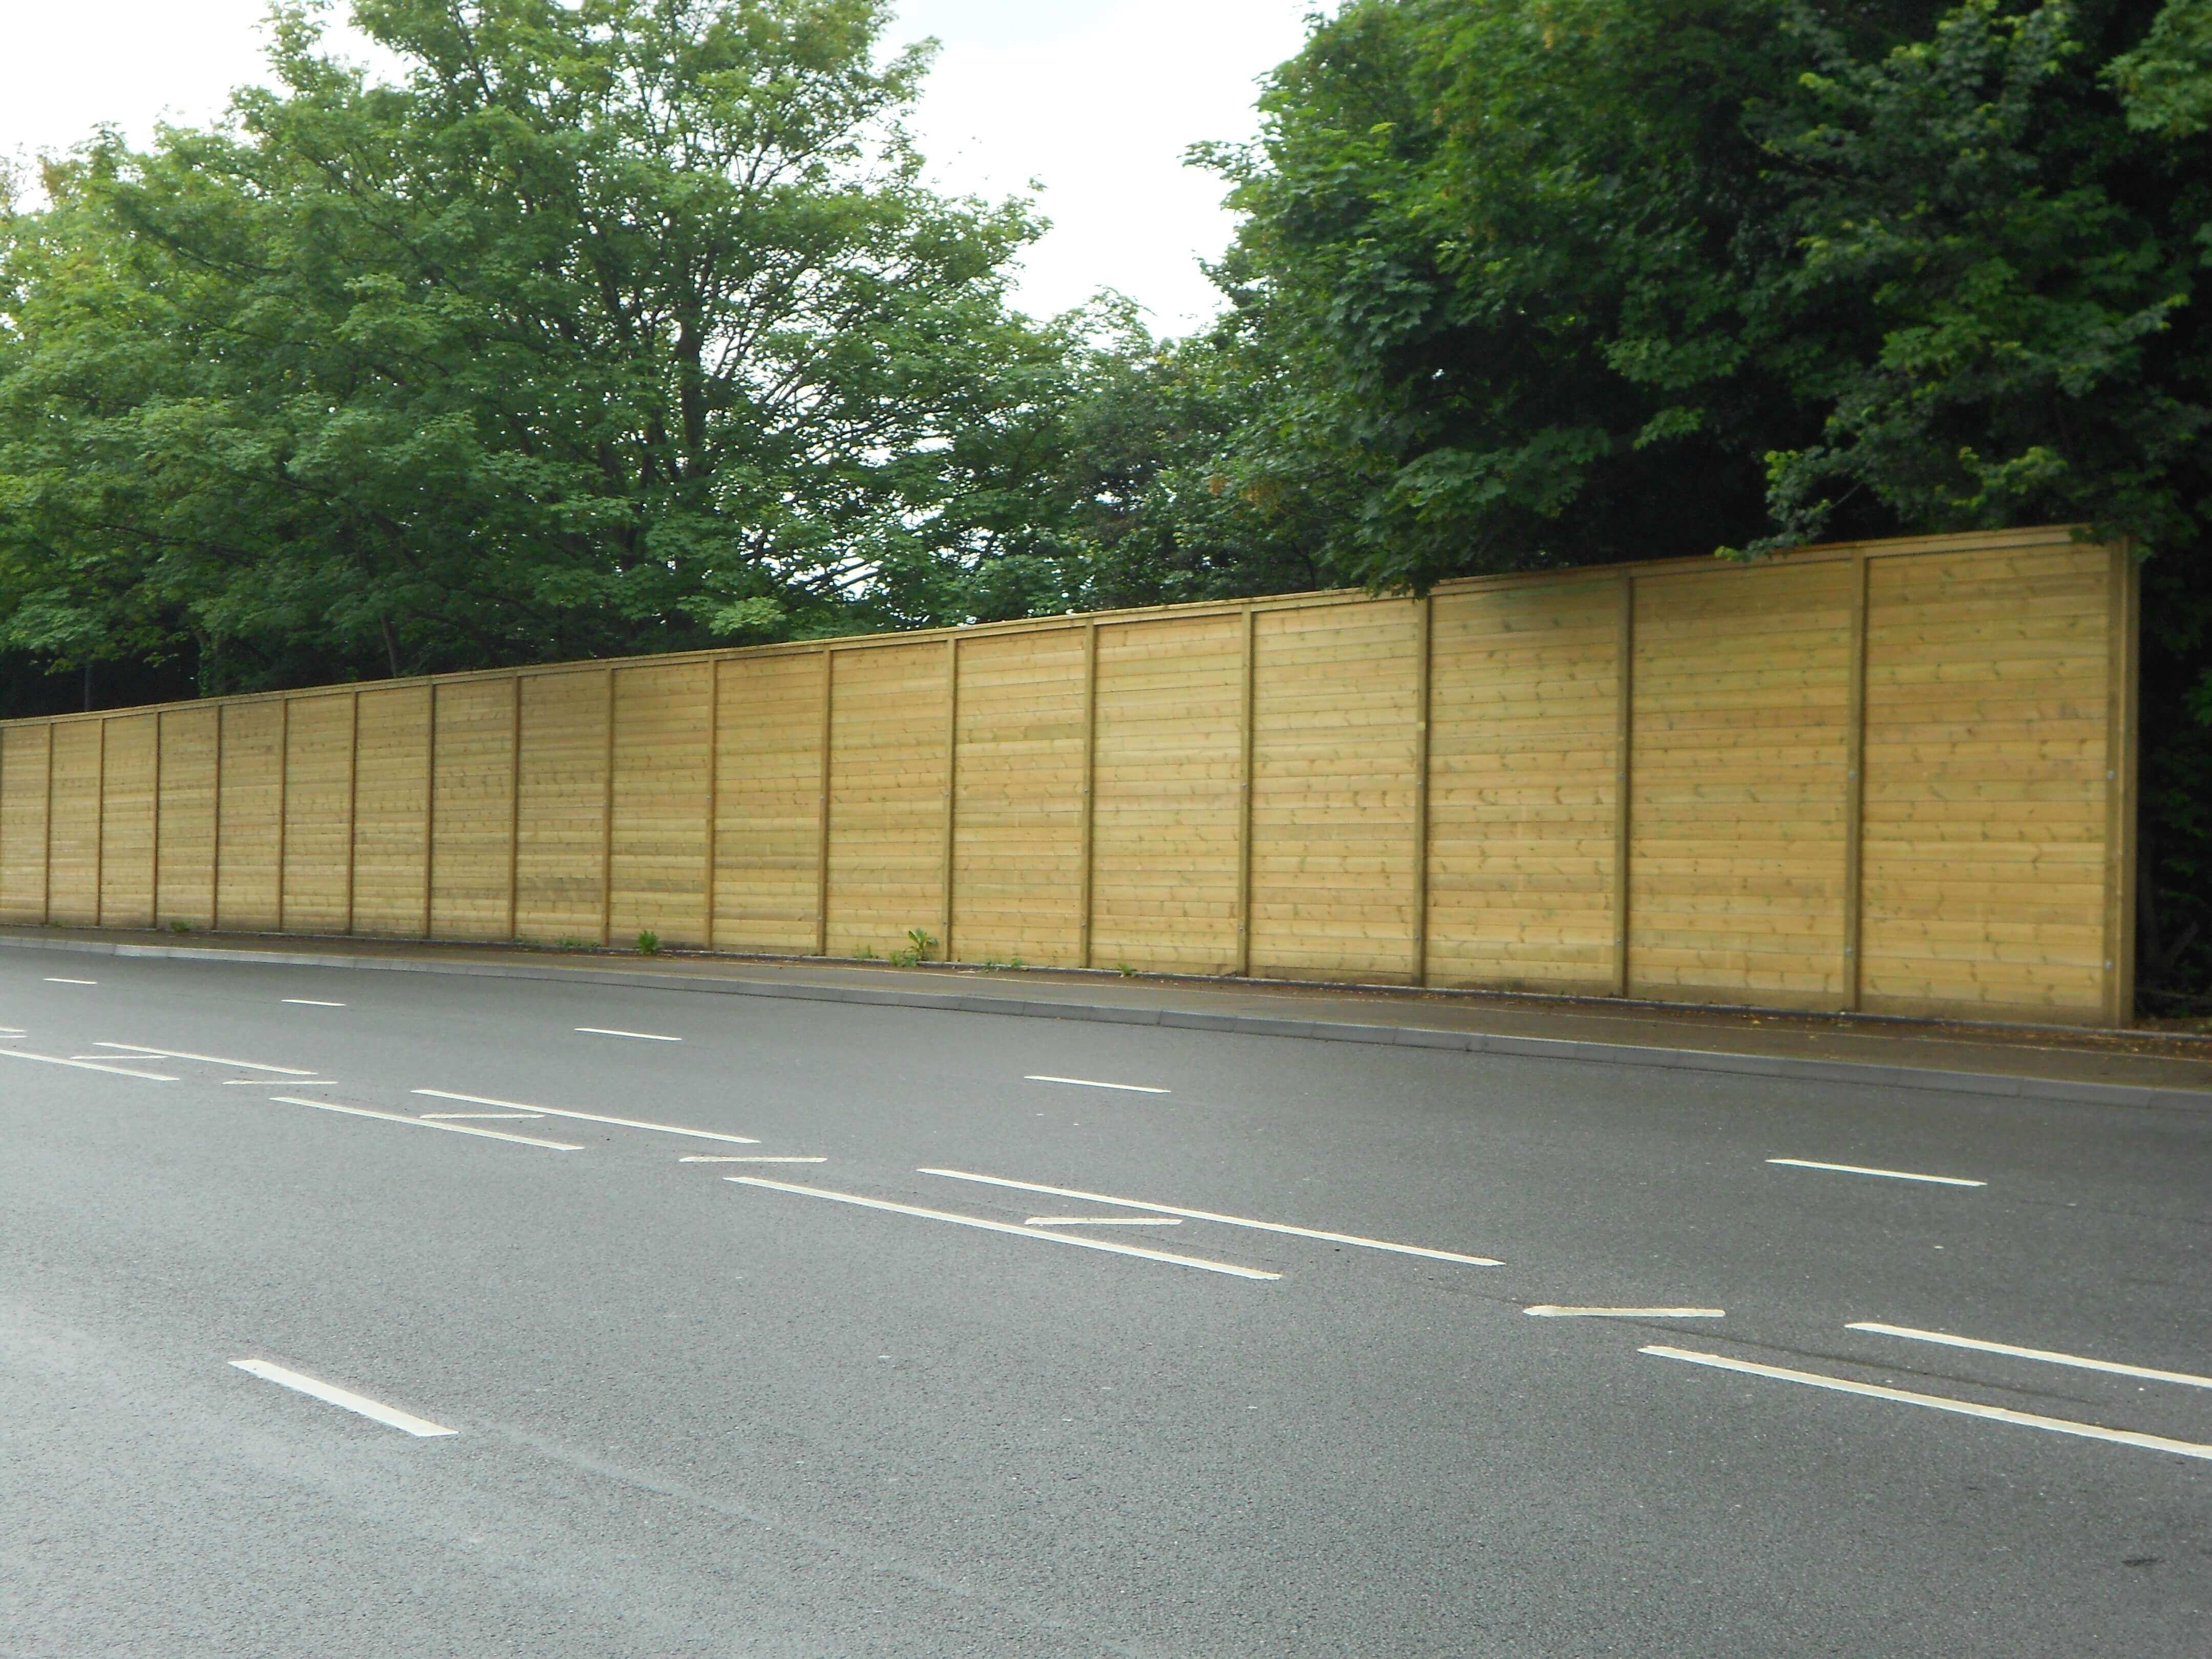 Acoustic fencing along road